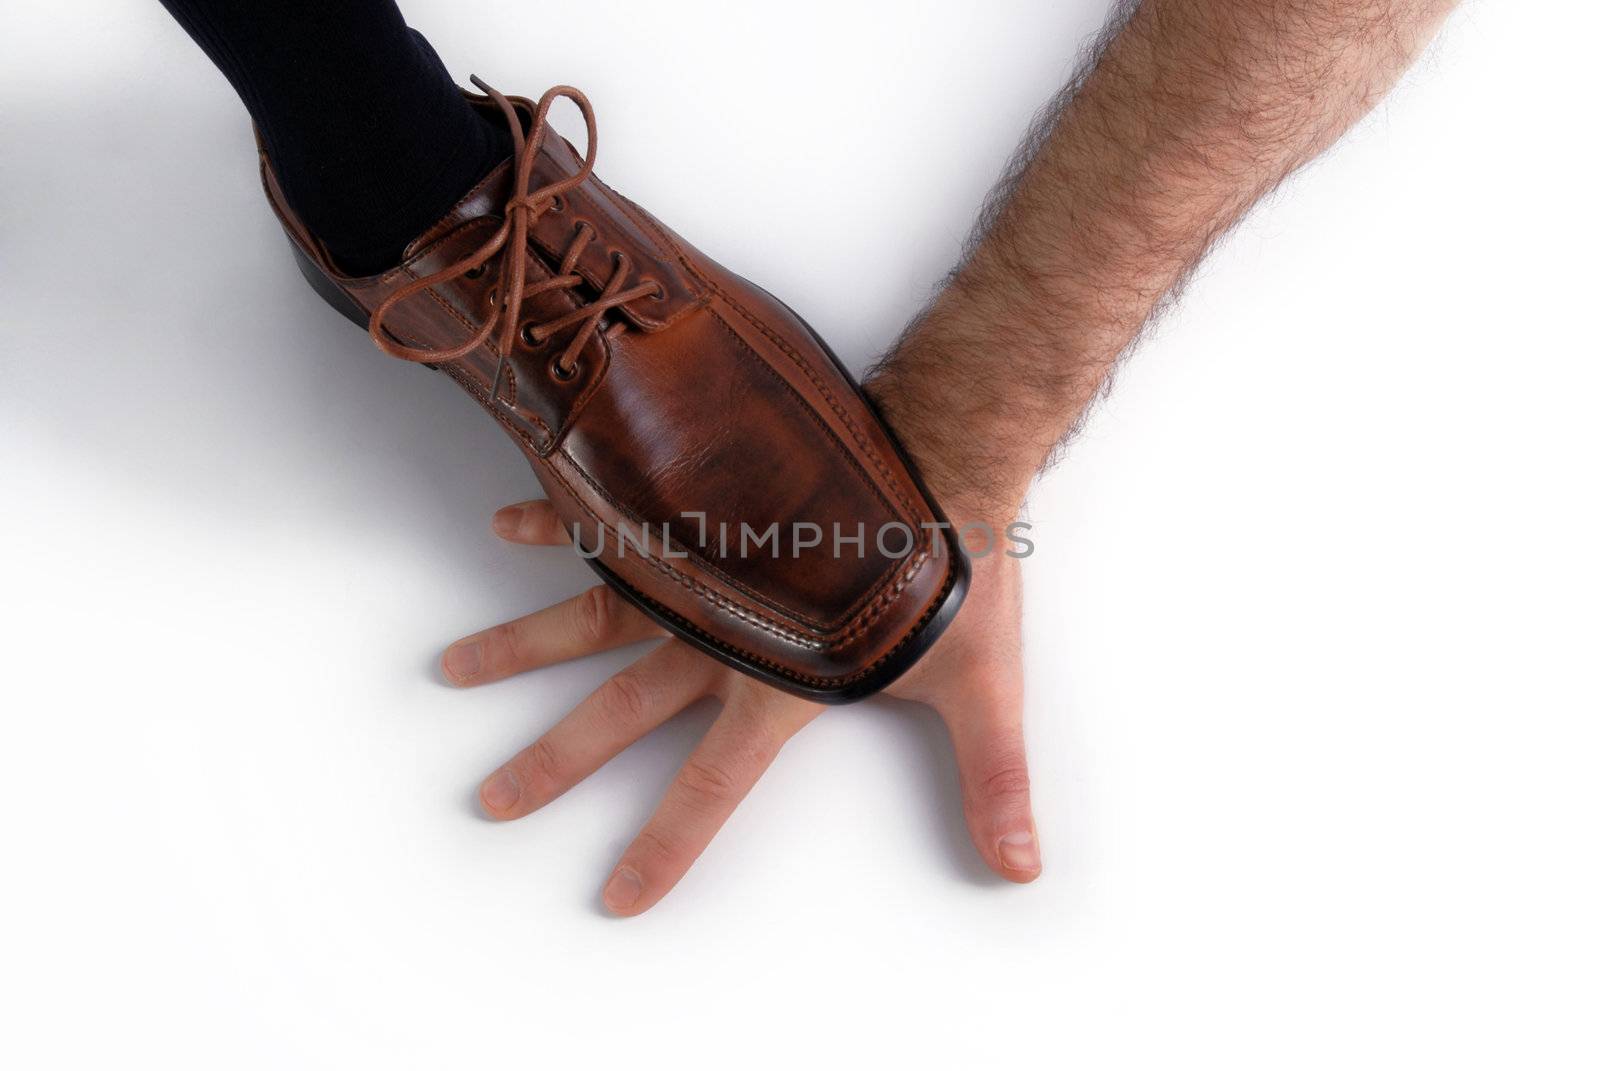 Shoe crushing a hand over white background. Upper view by cienpies